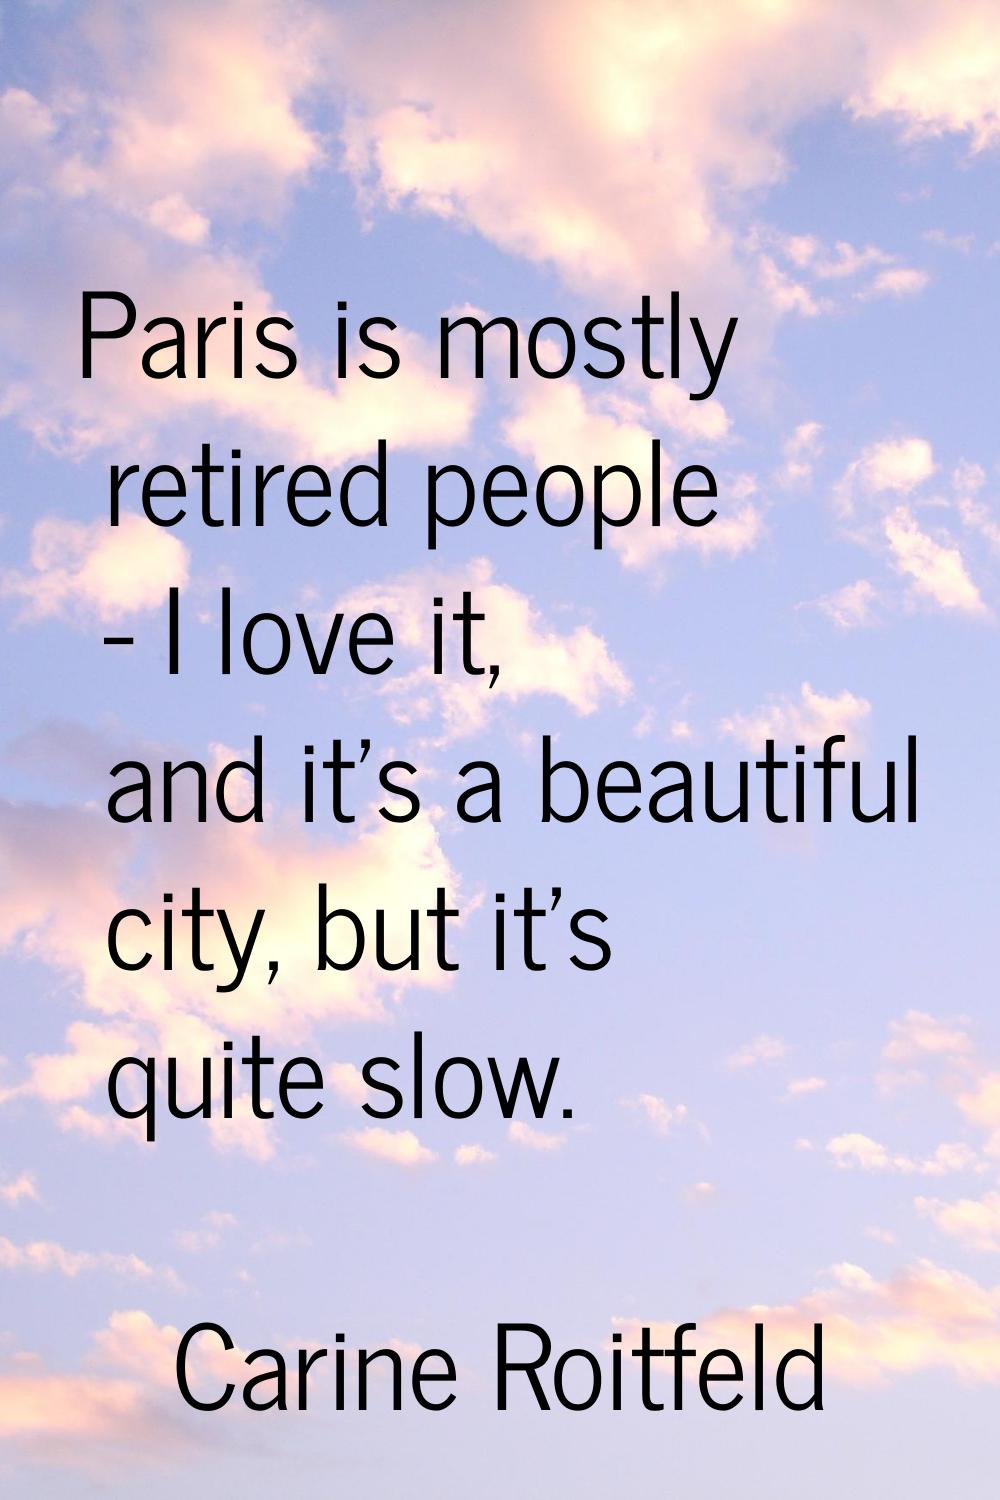 Paris is mostly retired people - I love it, and it's a beautiful city, but it's quite slow.